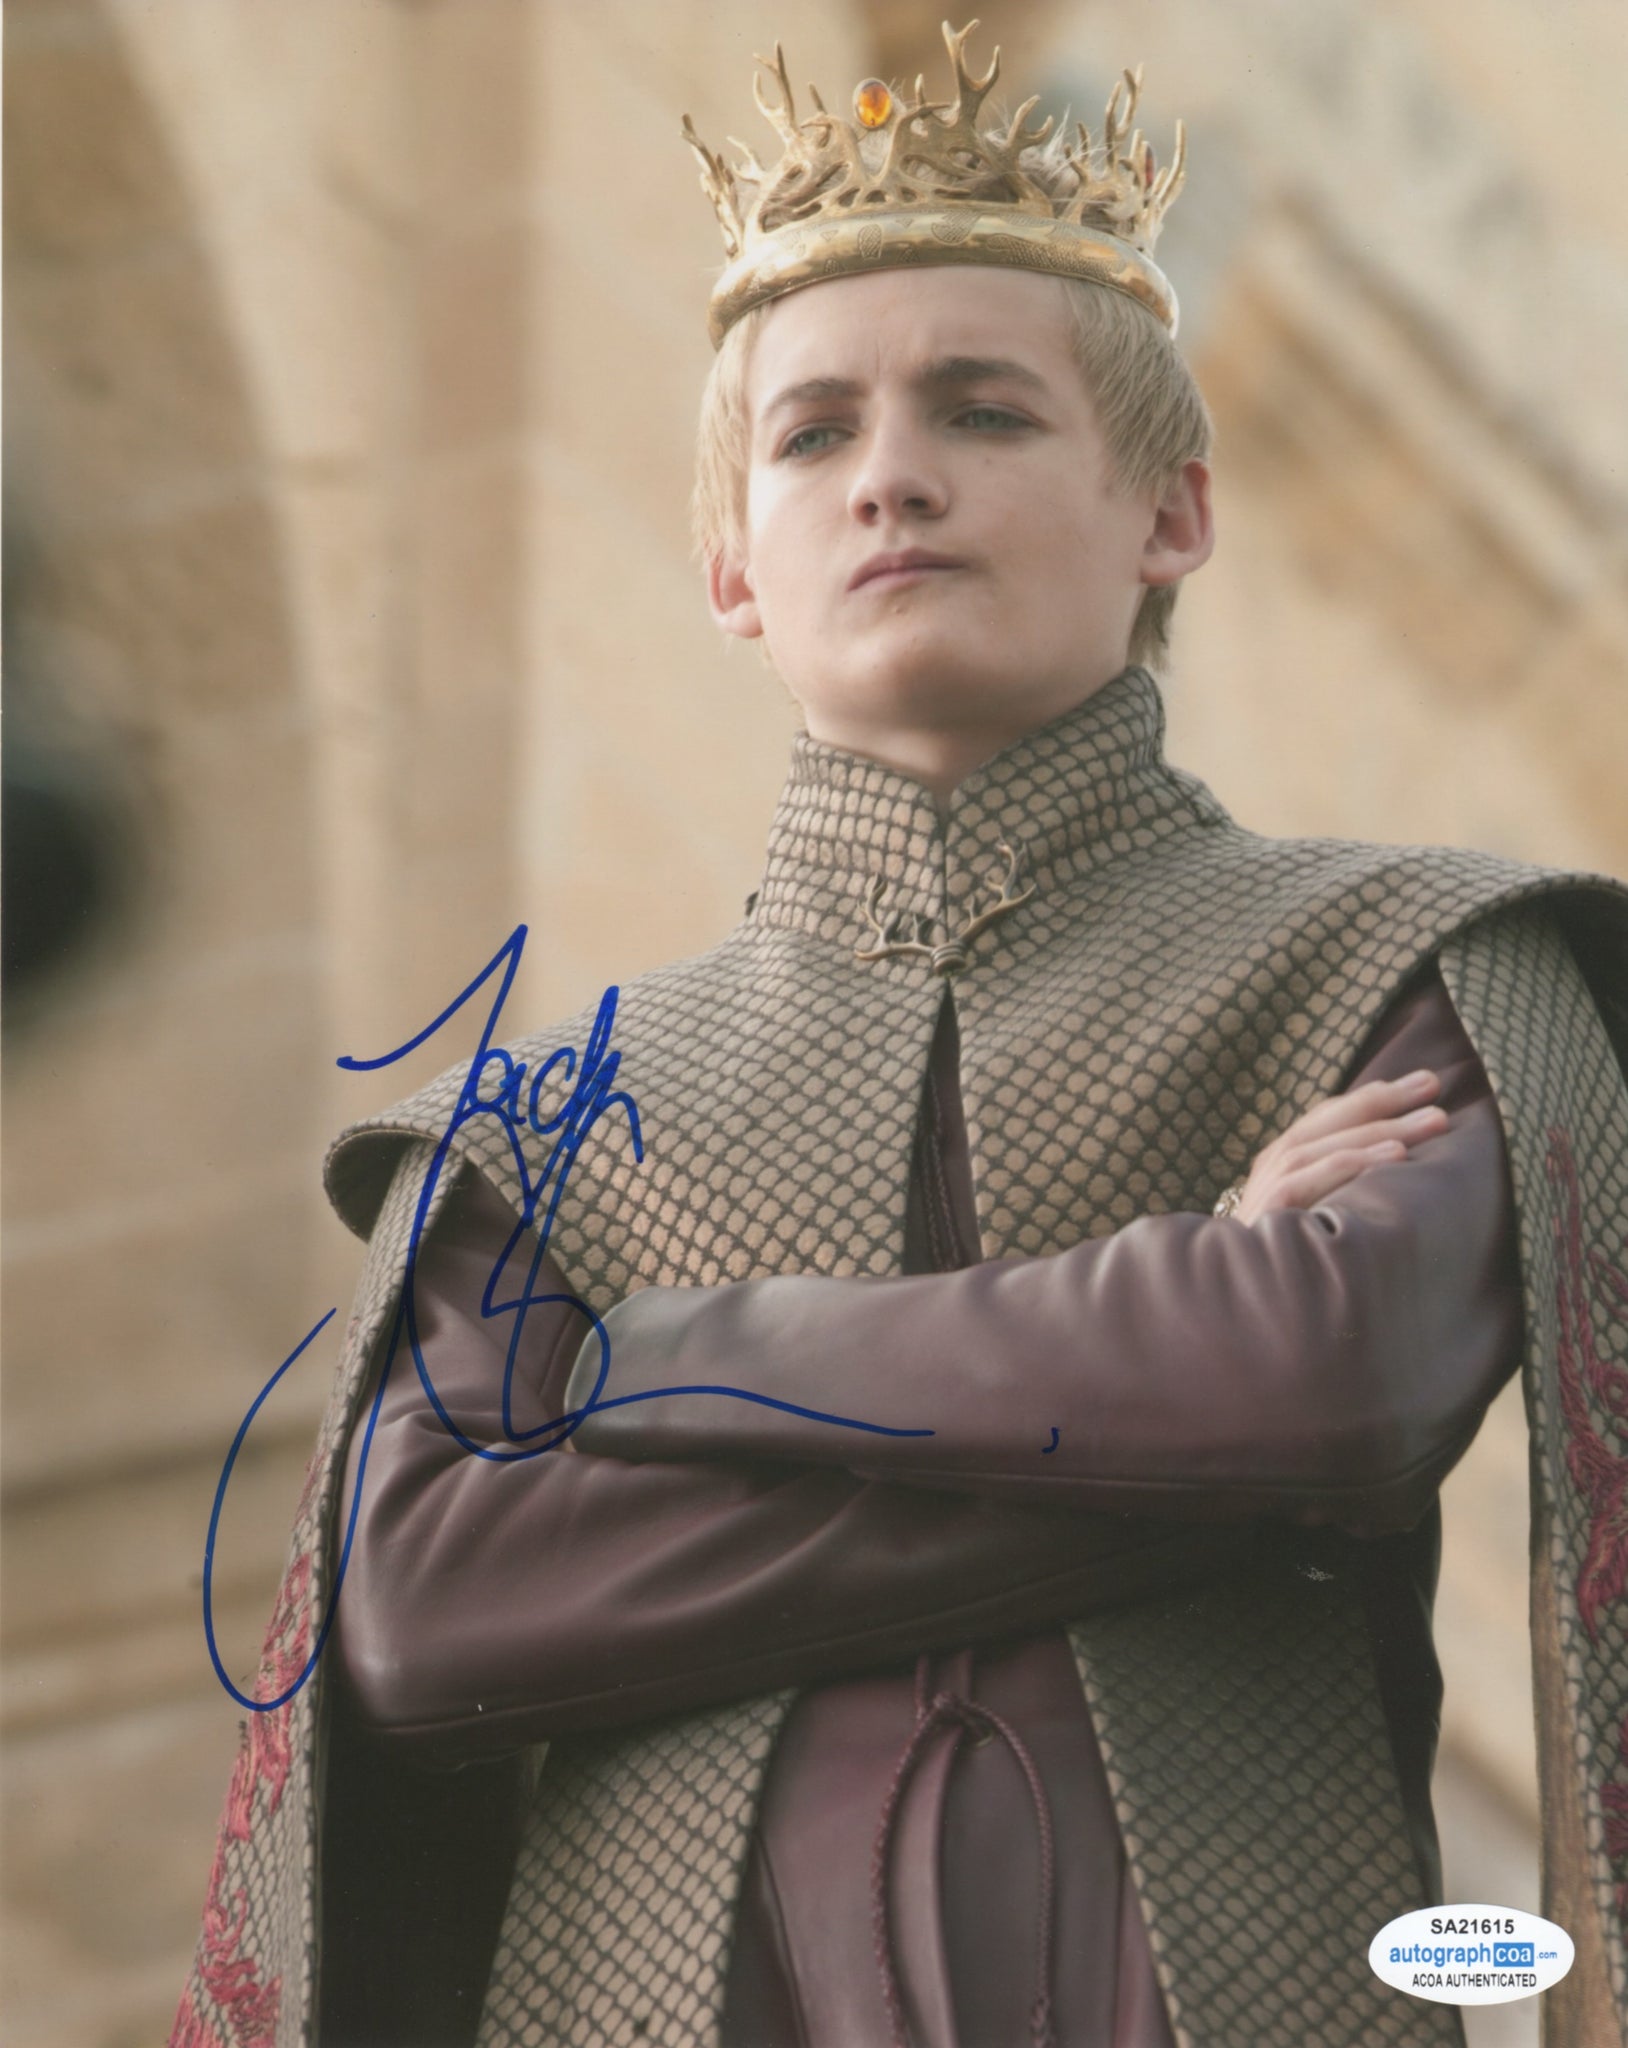 Jack Gleeson Game of Thrones Signed Autograph 8x10 Photo ACOA #10 - Outlaw Hobbies Authentic Autographs